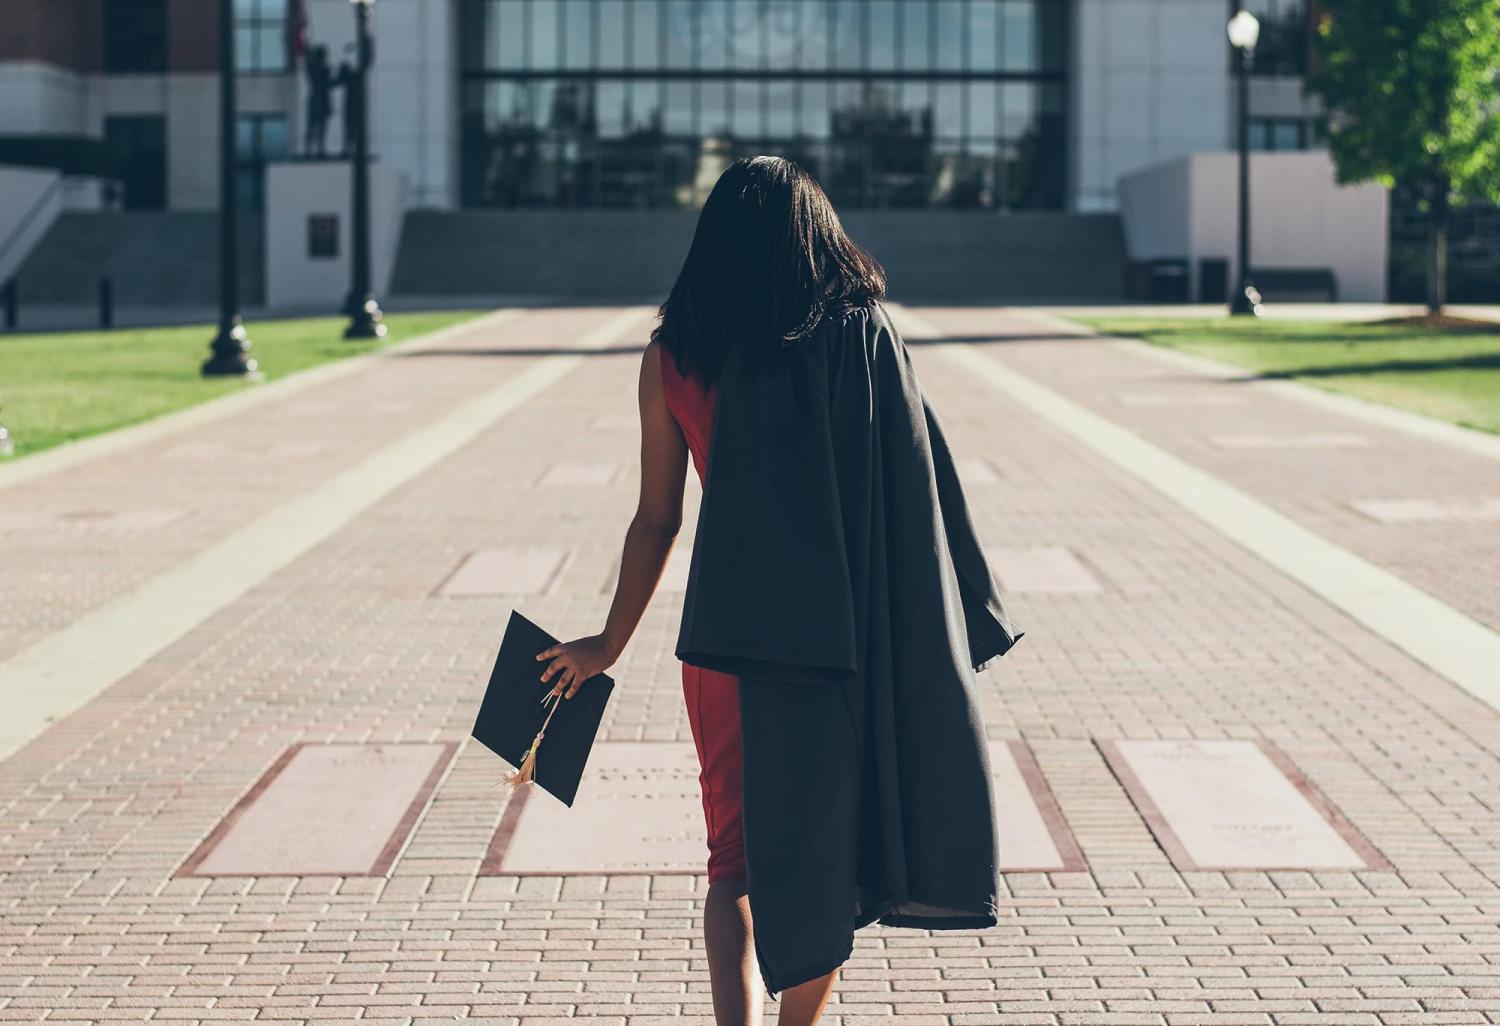 Recent graduate walking on campus with graduation cap and gown